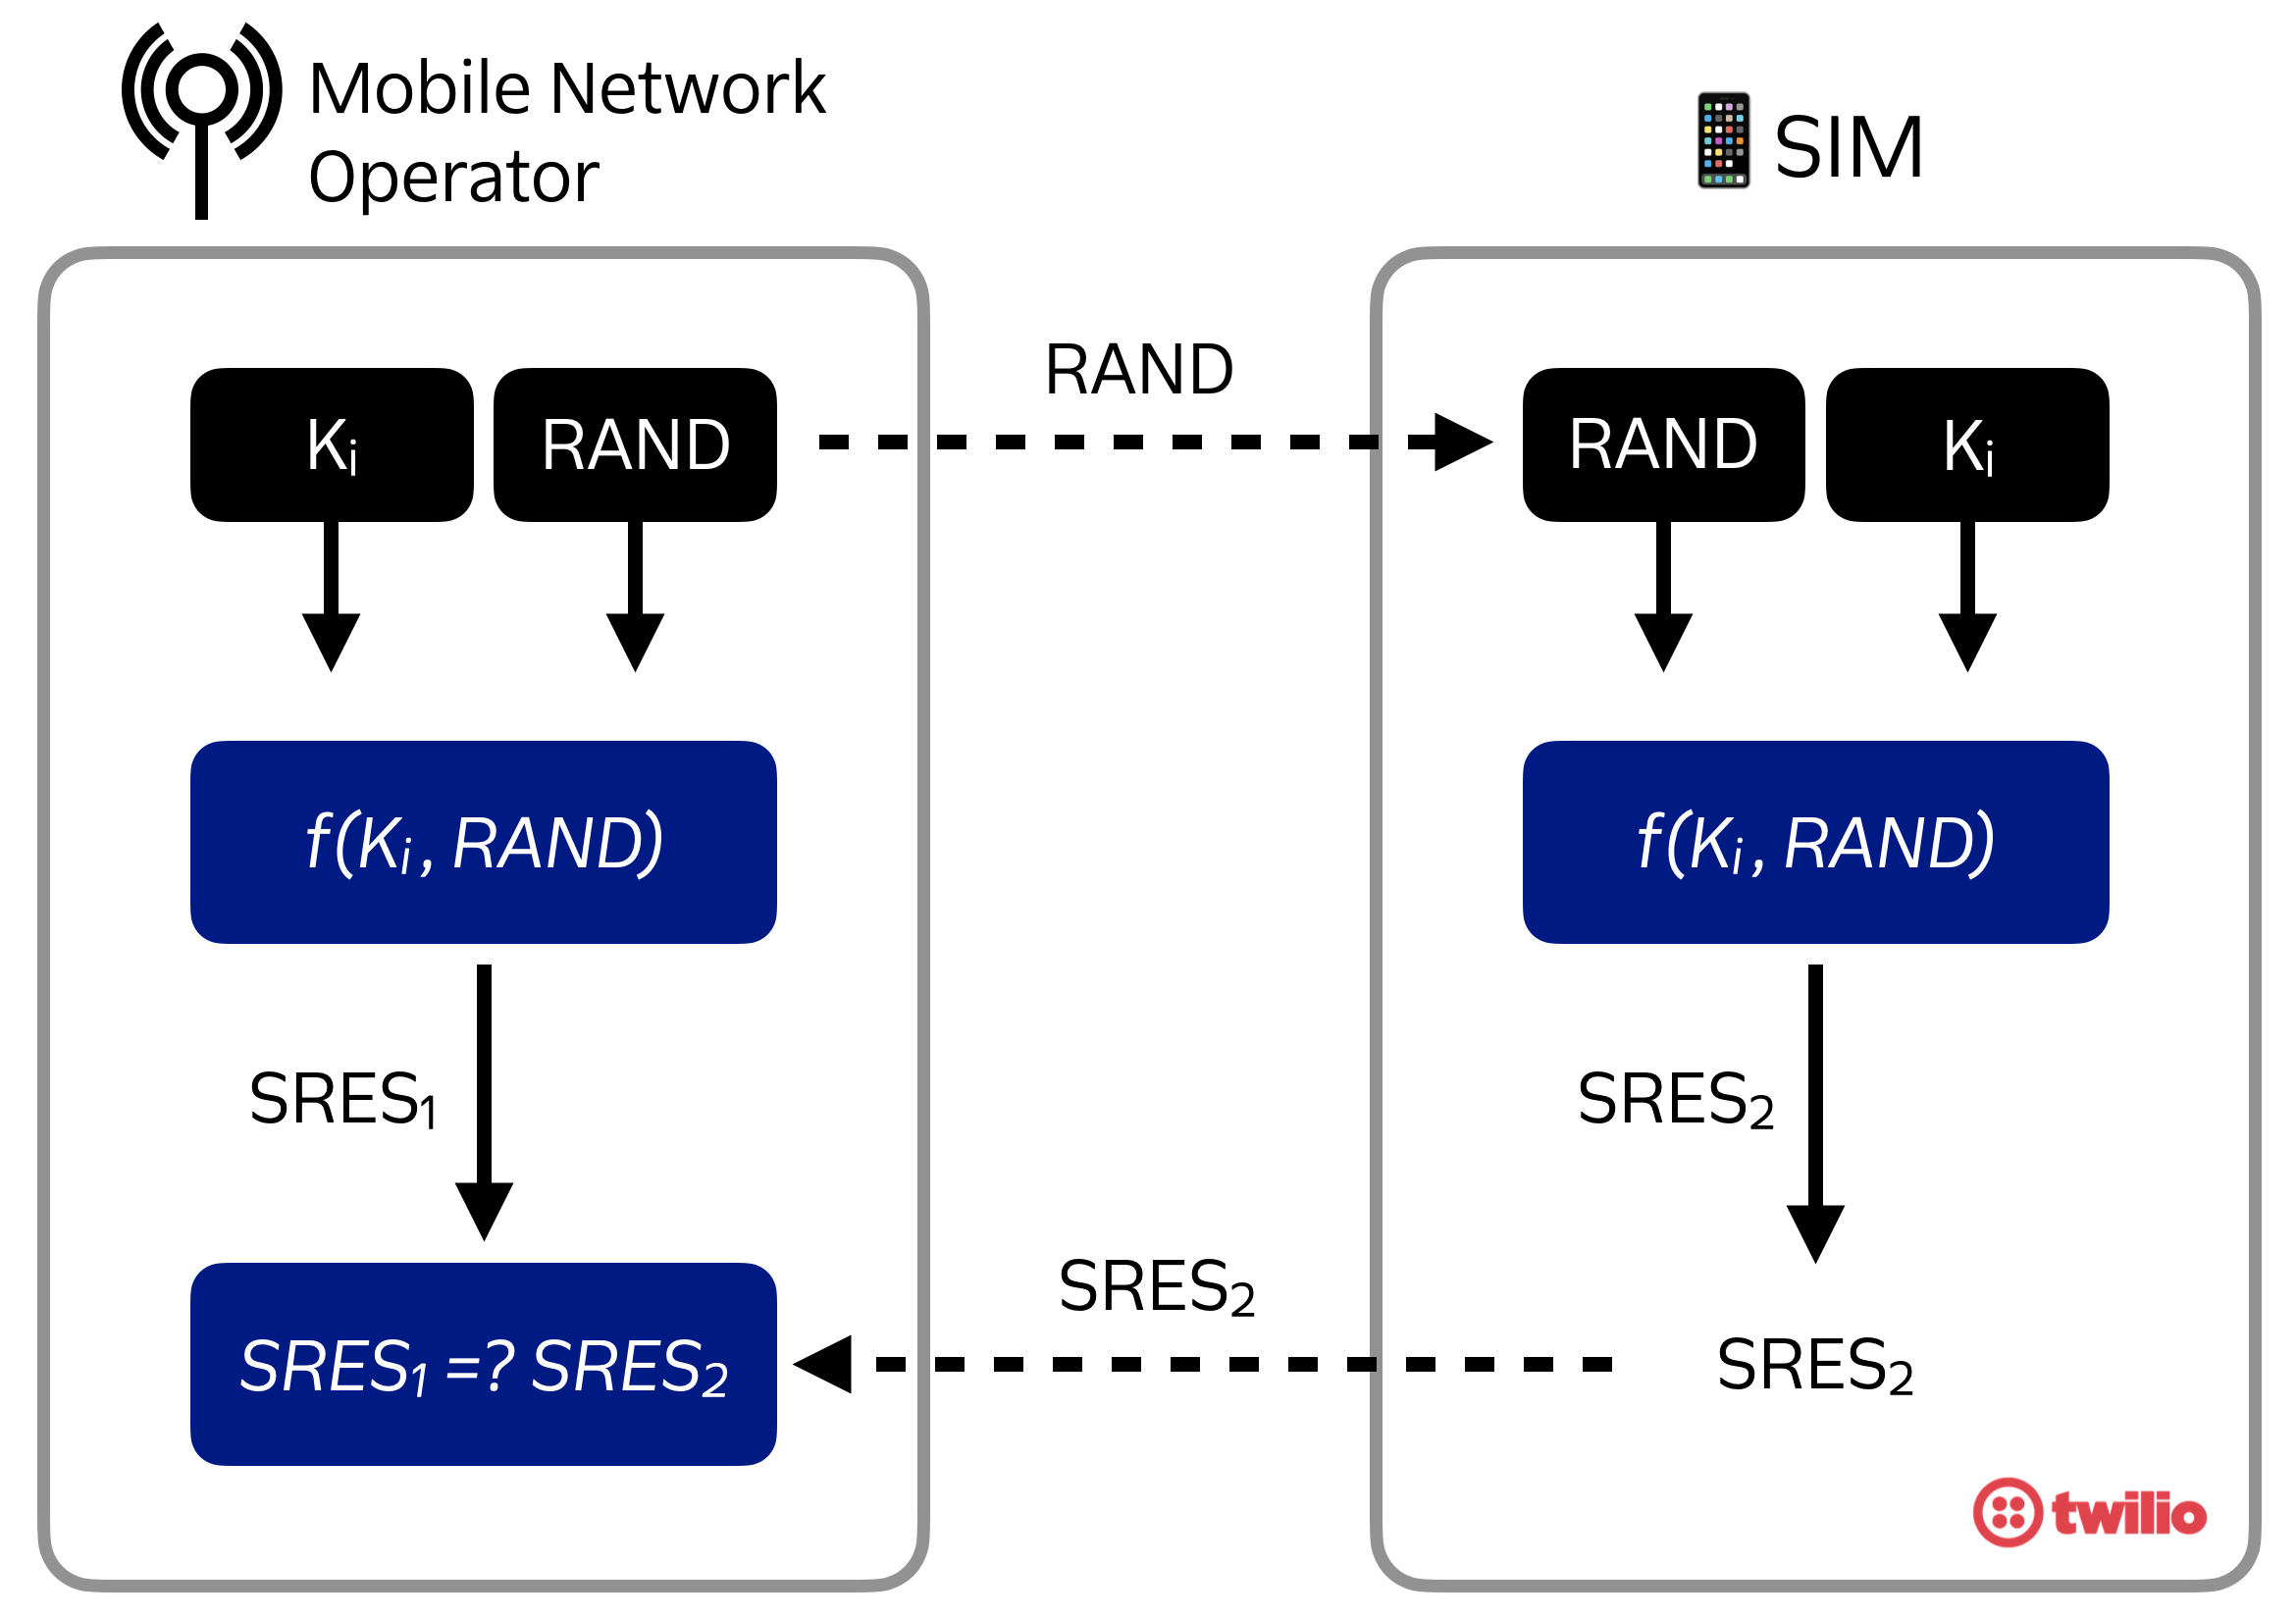 diagram showing the flow between mobile network operator and SIM to separately create a signed response and compare results for authentication. Steps are also described in the paragraph below this image.